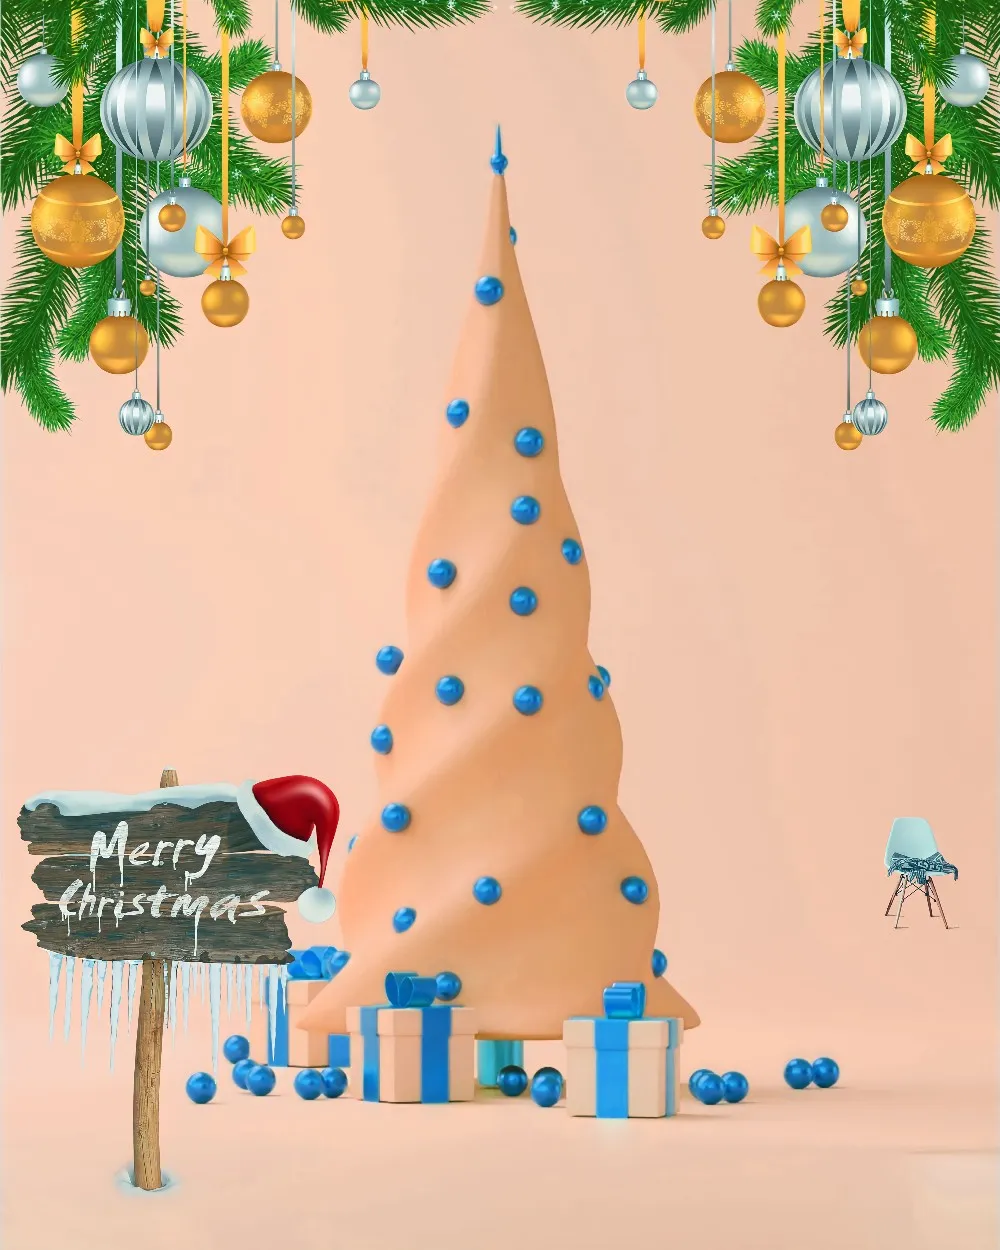 You are currently viewing Merry Christmas tree picture download in high quality